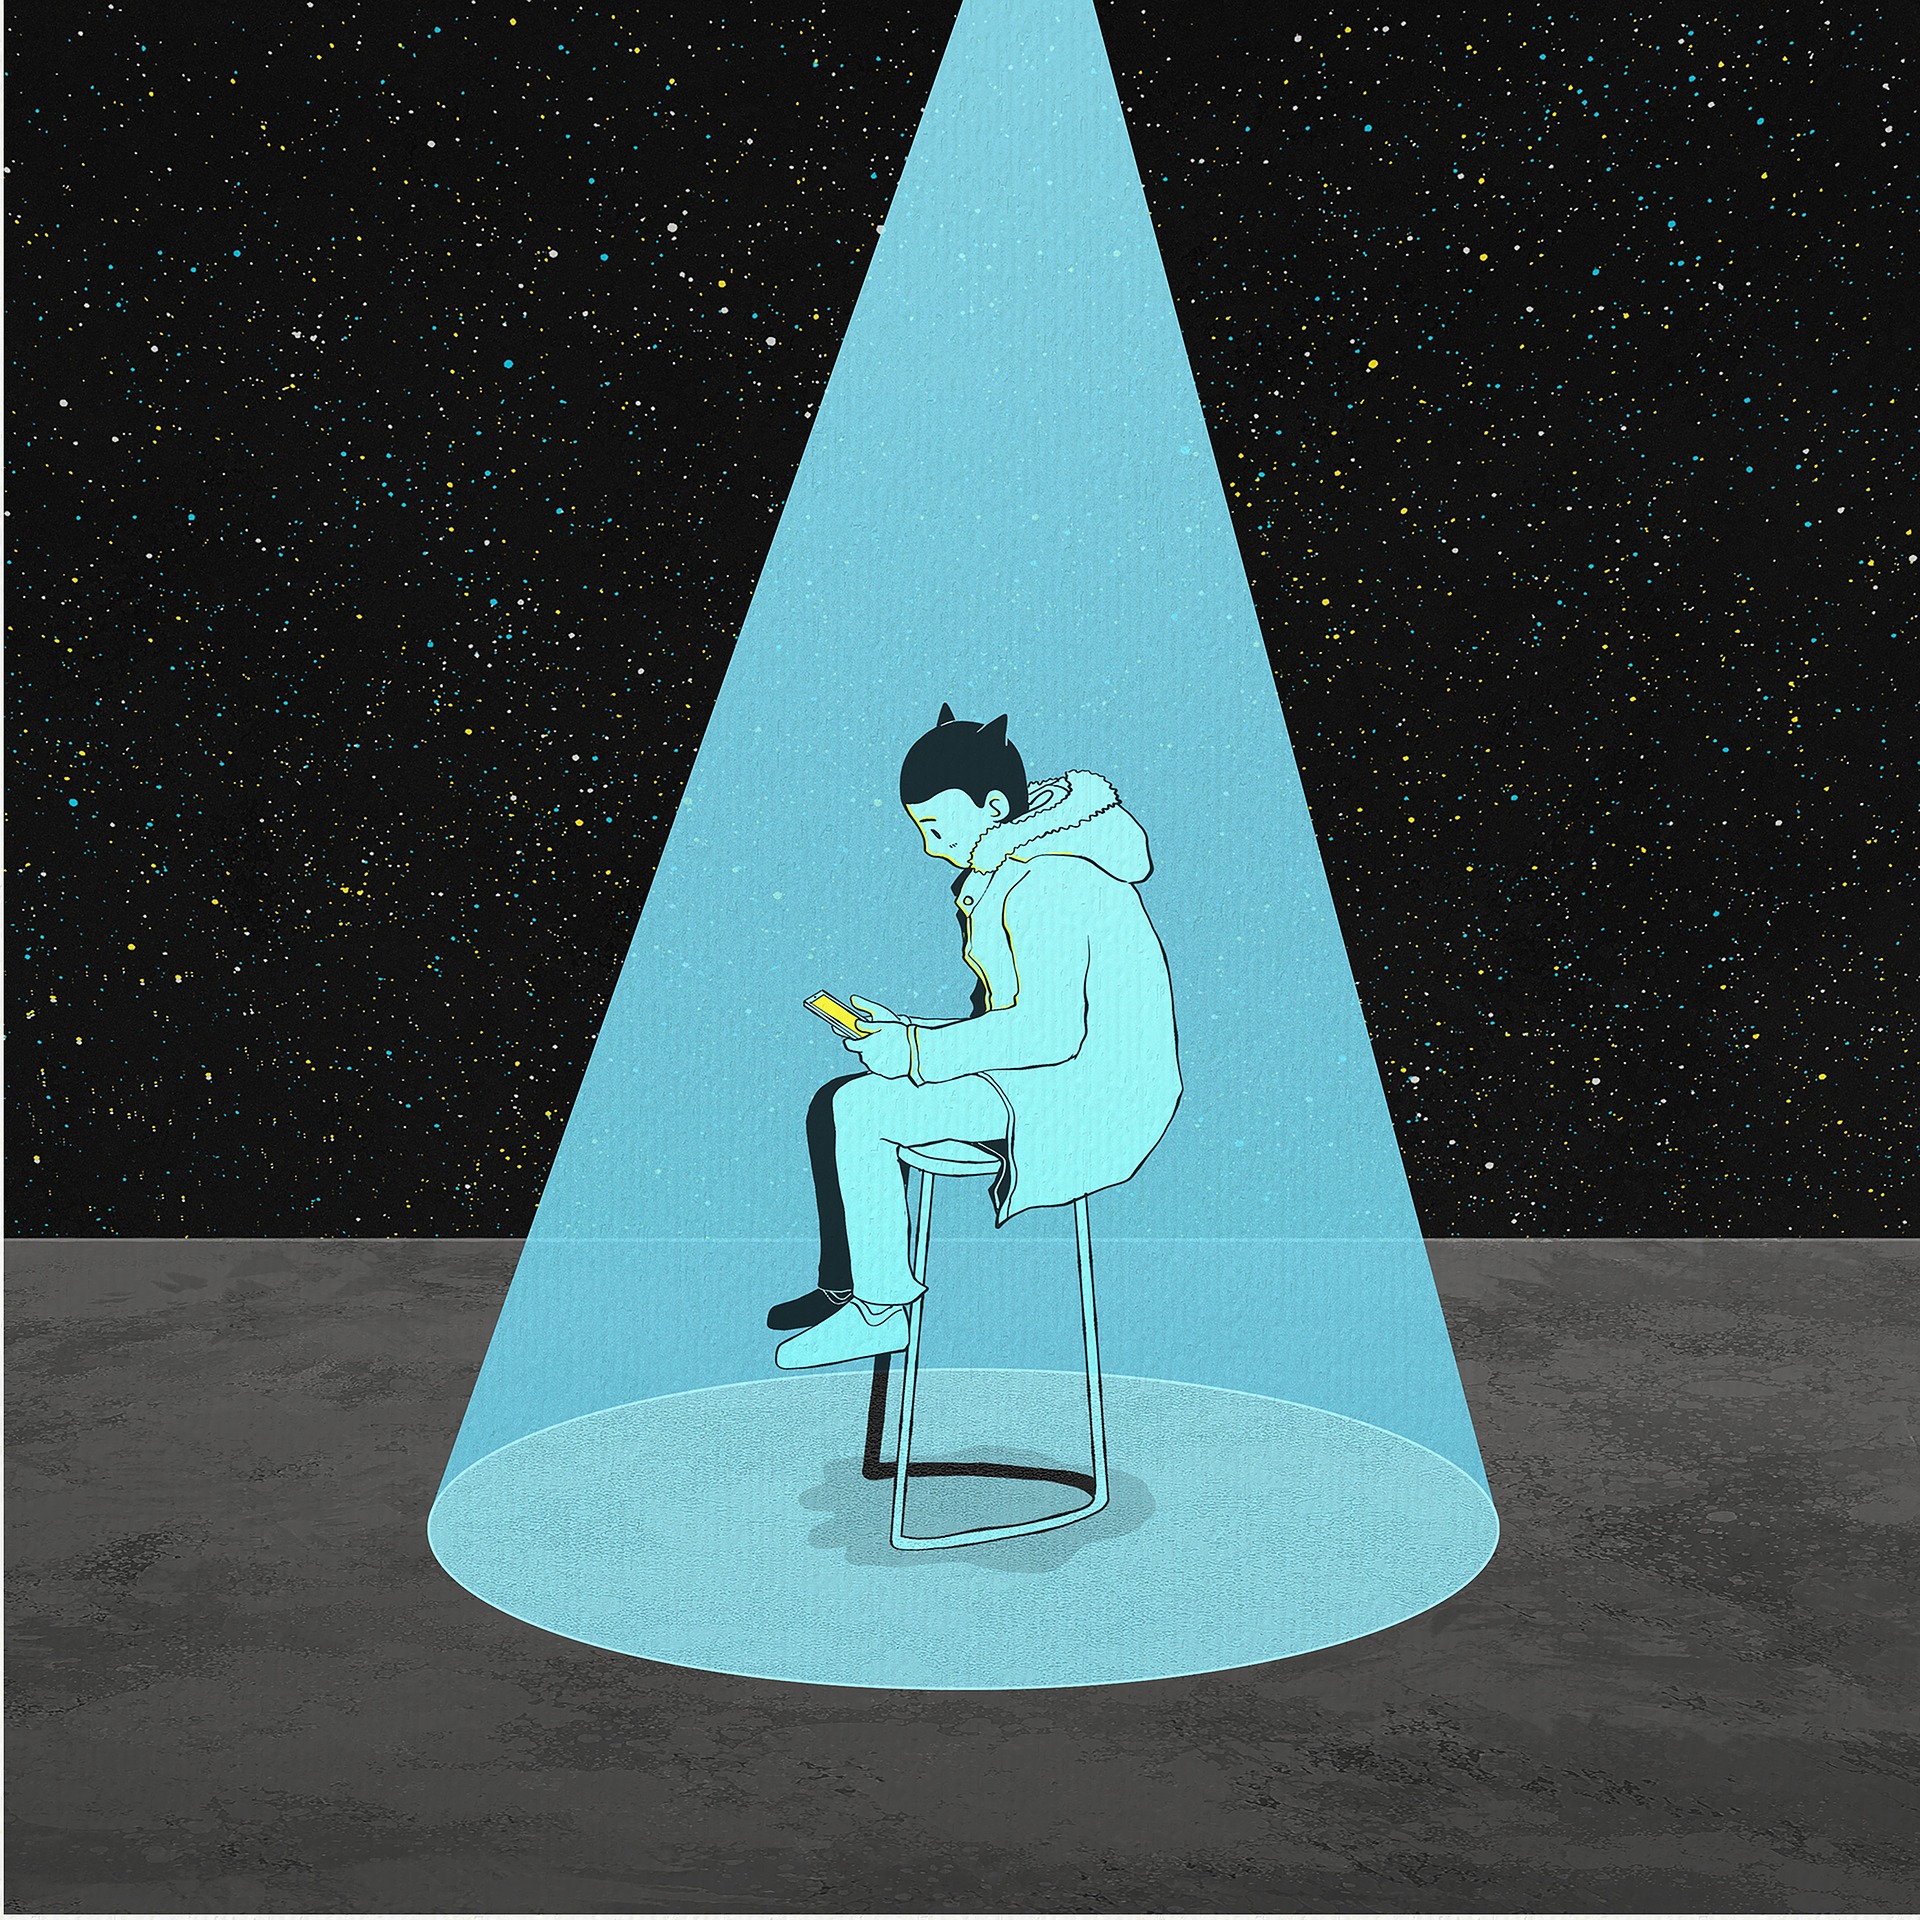 A person sits alone on a chair under a UFO spot light in space. 